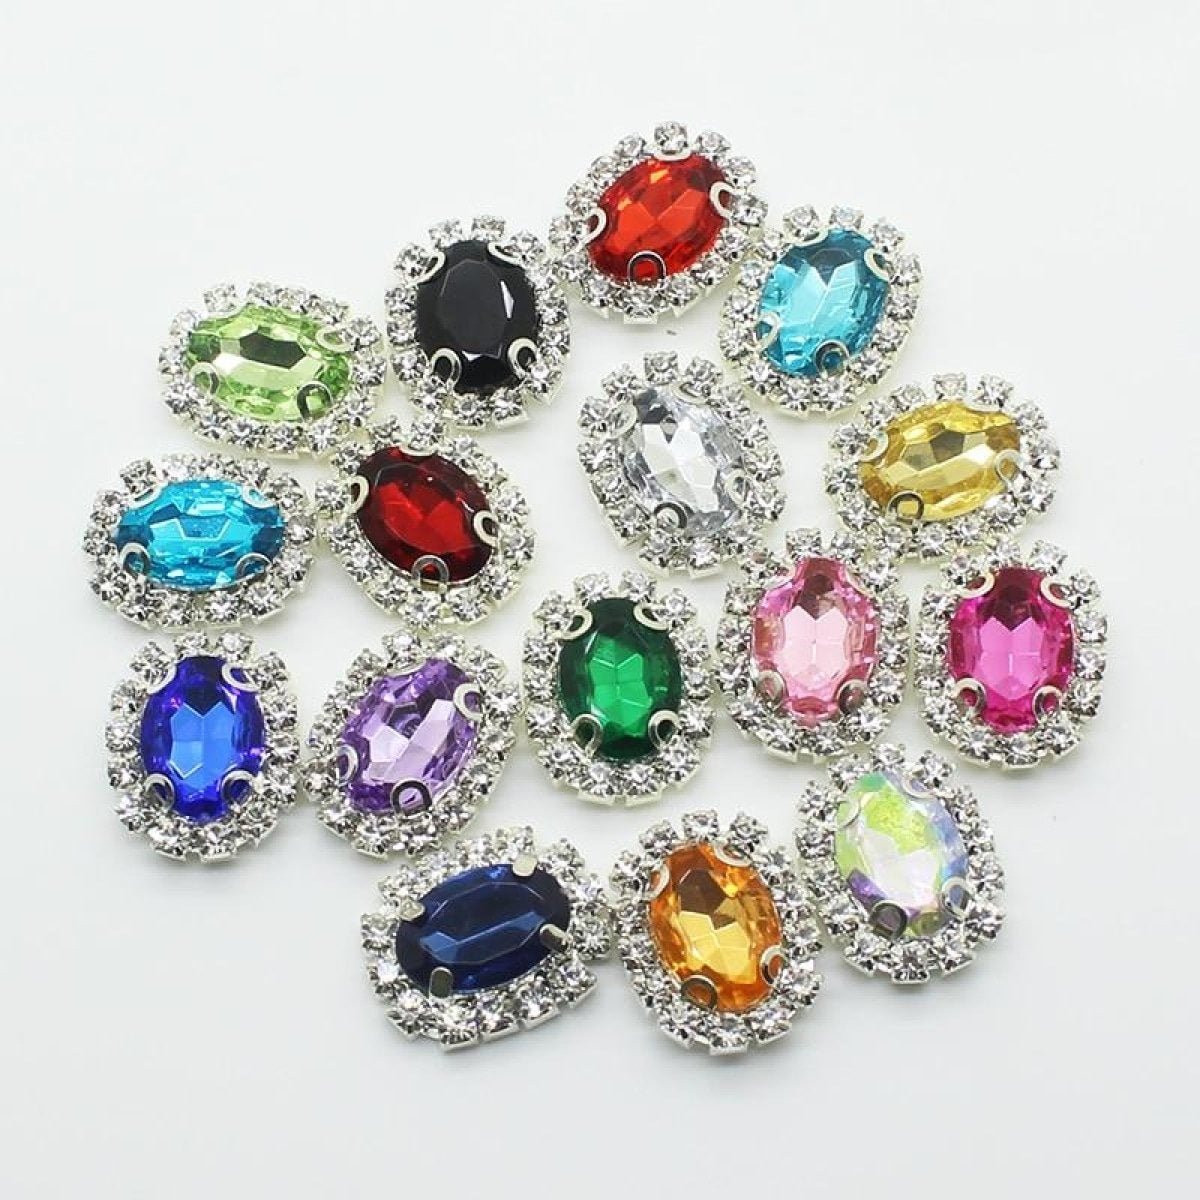 10pcs Rhinestone Cabochon Clothing Buttons Acrylic Gem Sewing Button Decoration Mixed Colours Metal Base Craft 15x20mm - 1 - - Asia Sell